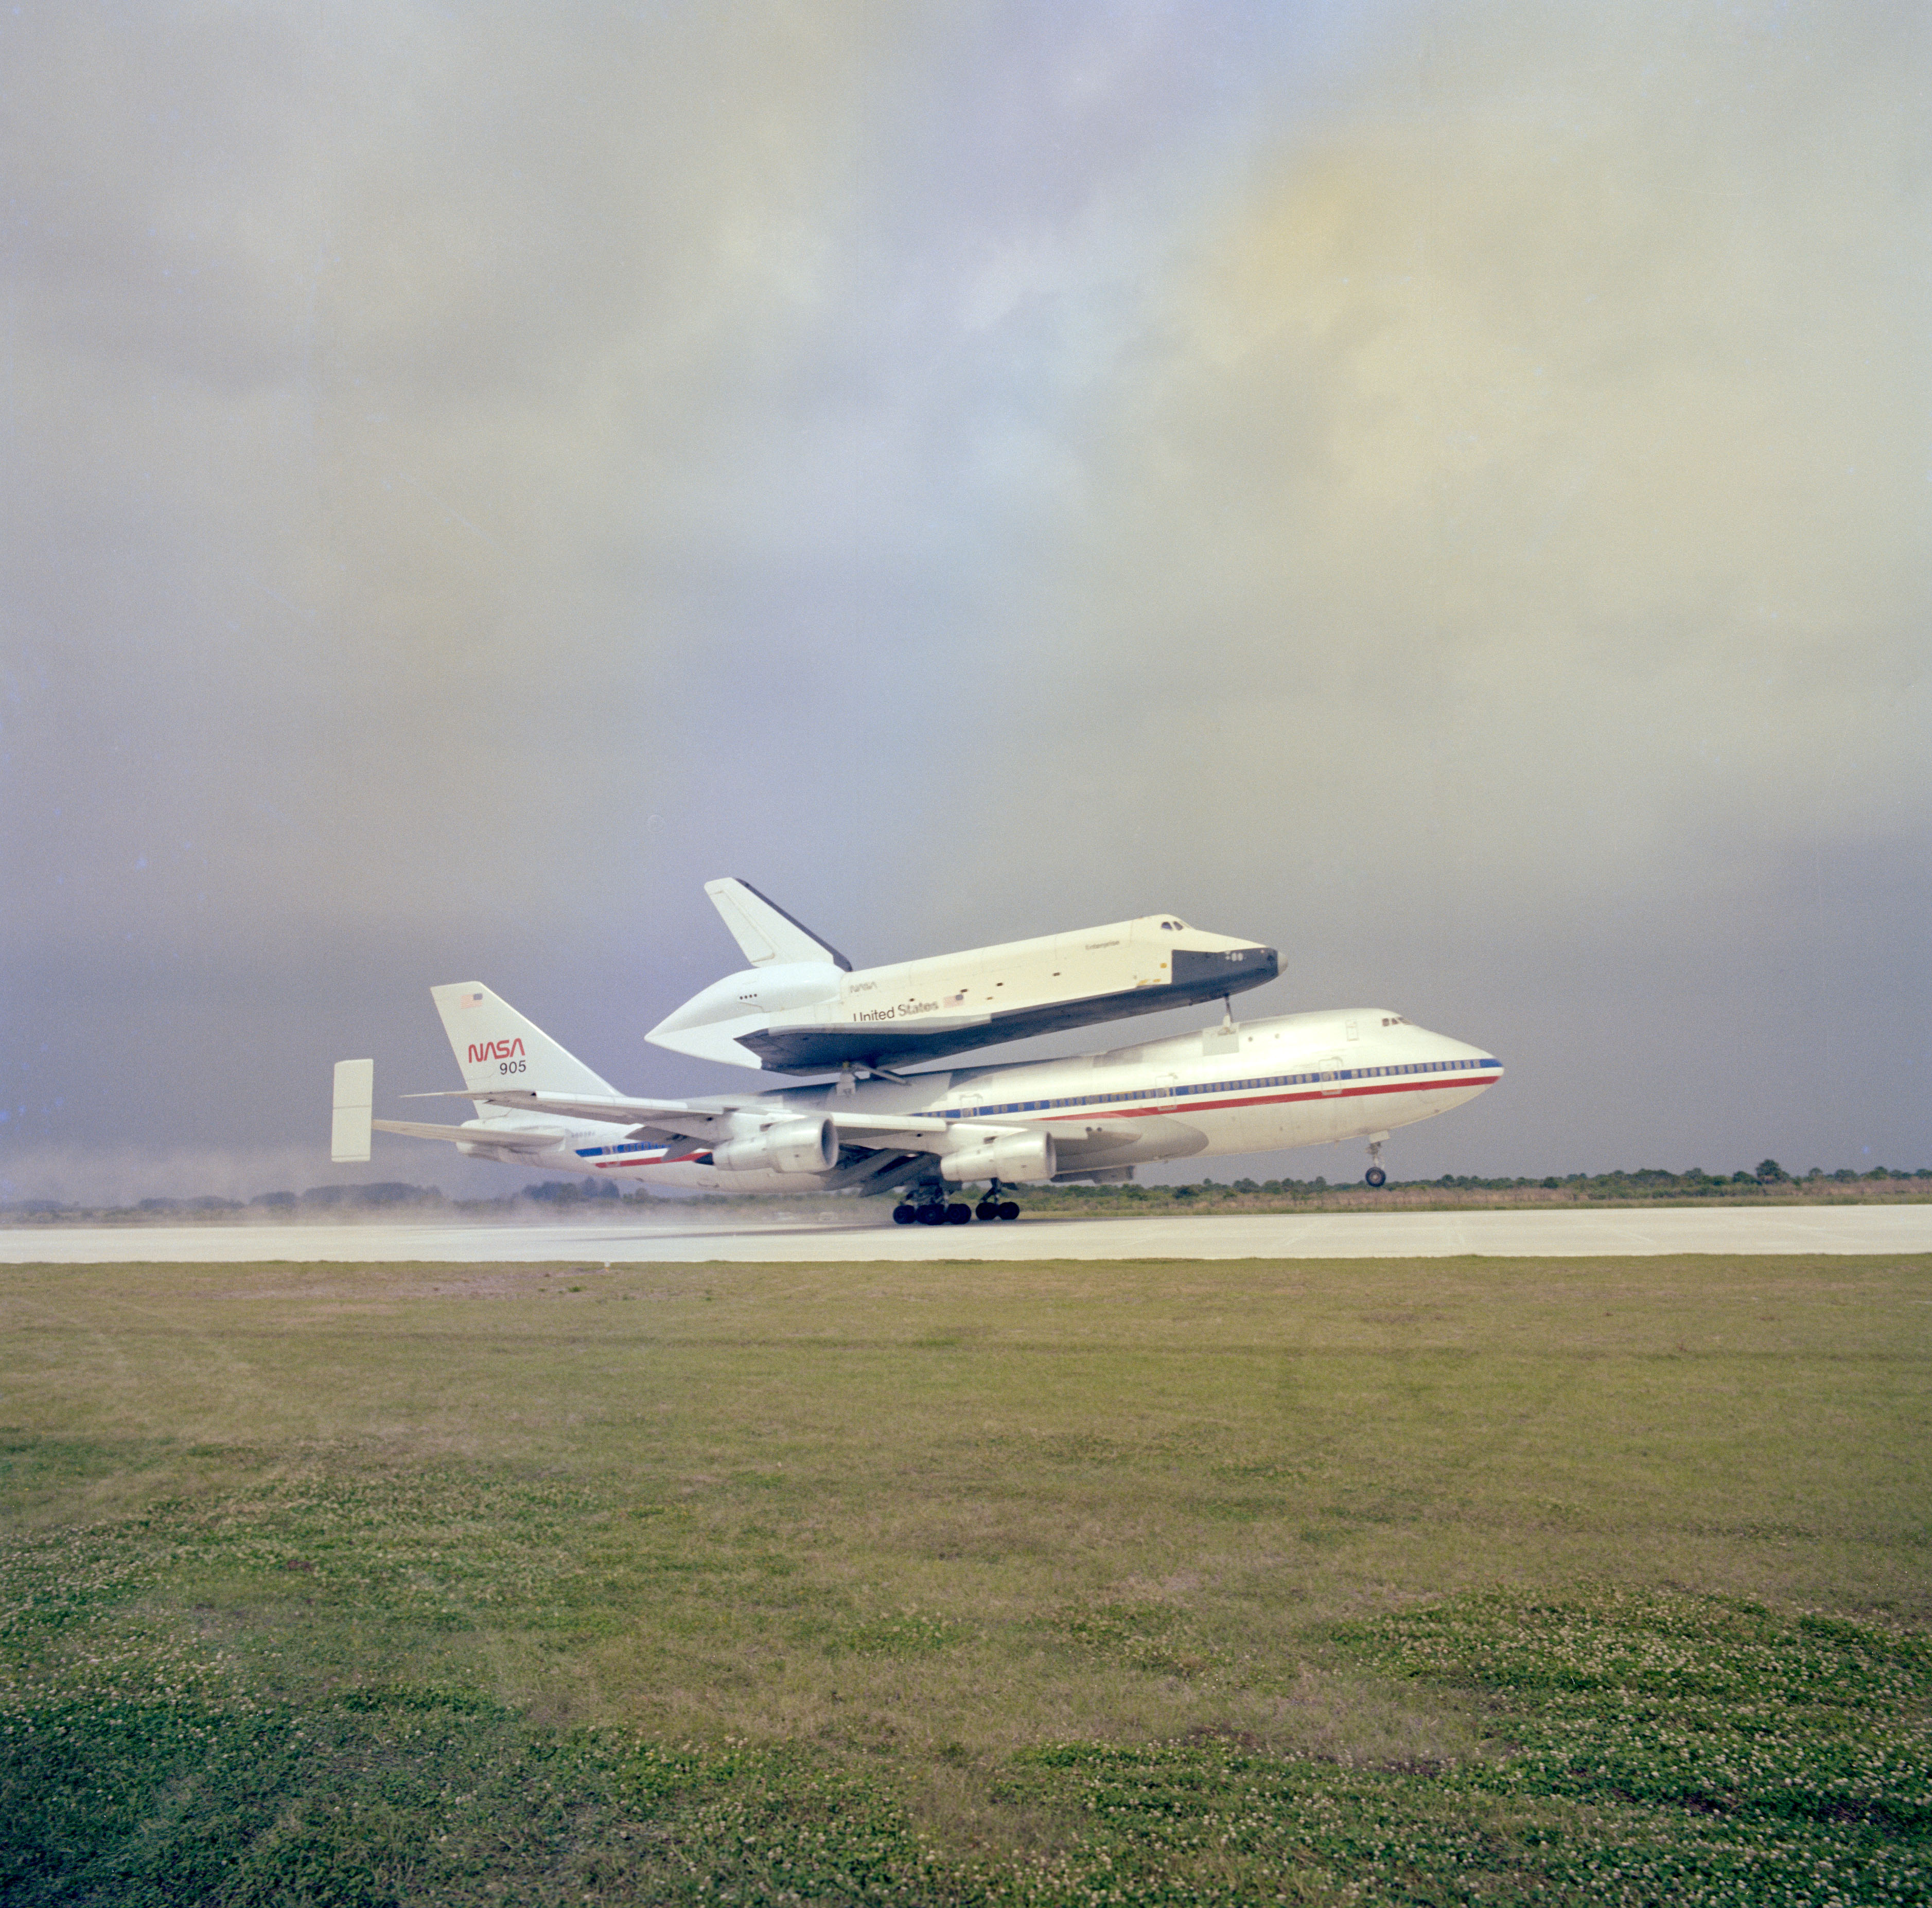 Enterprise atop its Shuttle Carrier Aircraft (SCA) touches down on the runway at NASA’s Kennedy Space Center in Florida